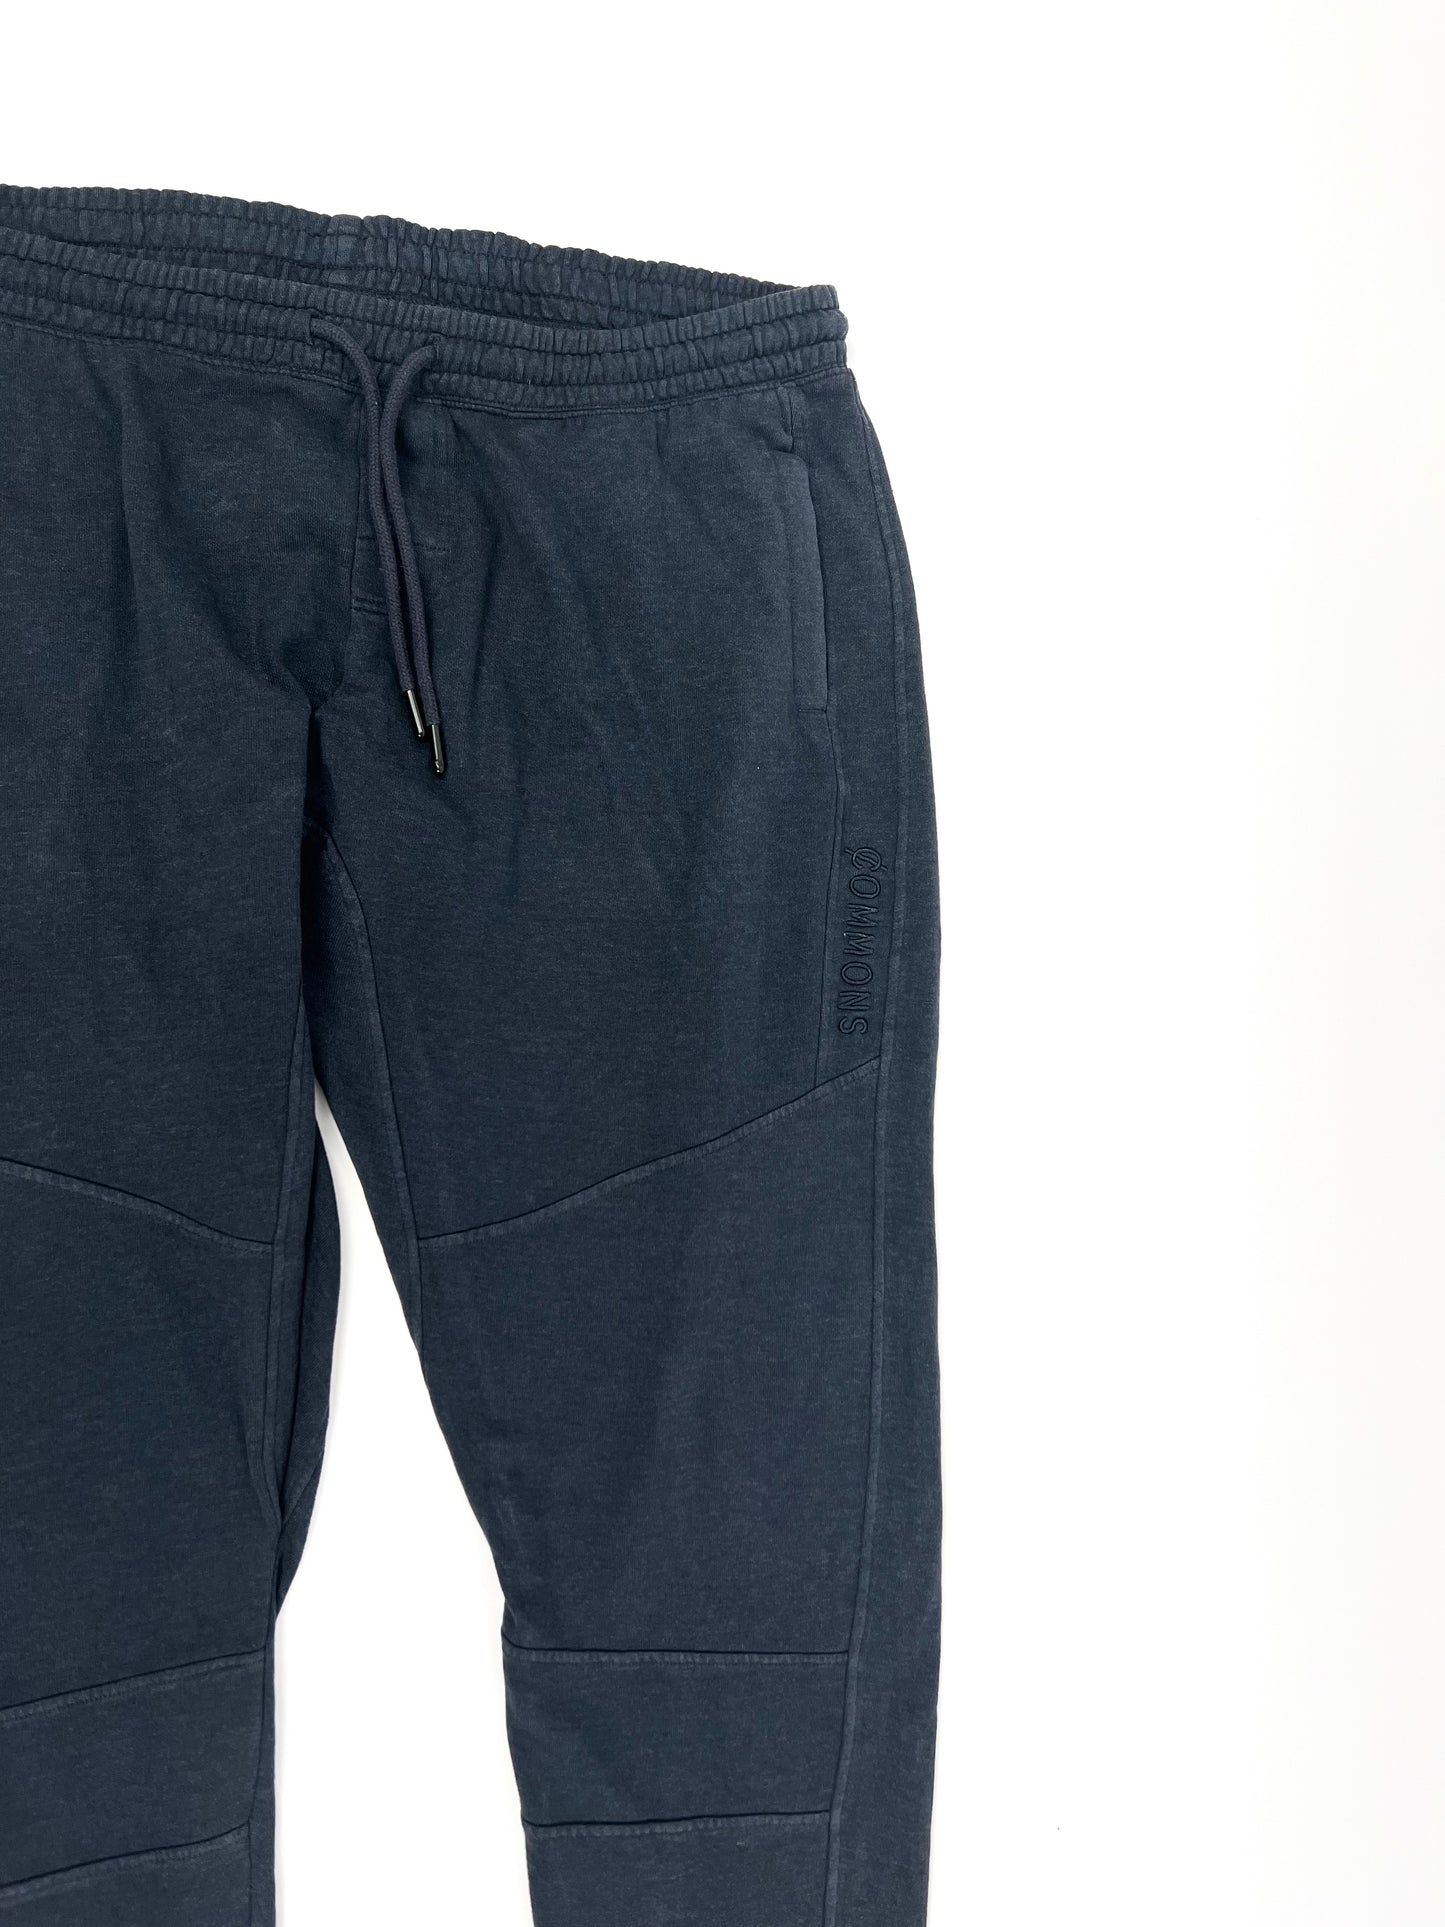 CMNS jogger pants in washed navy